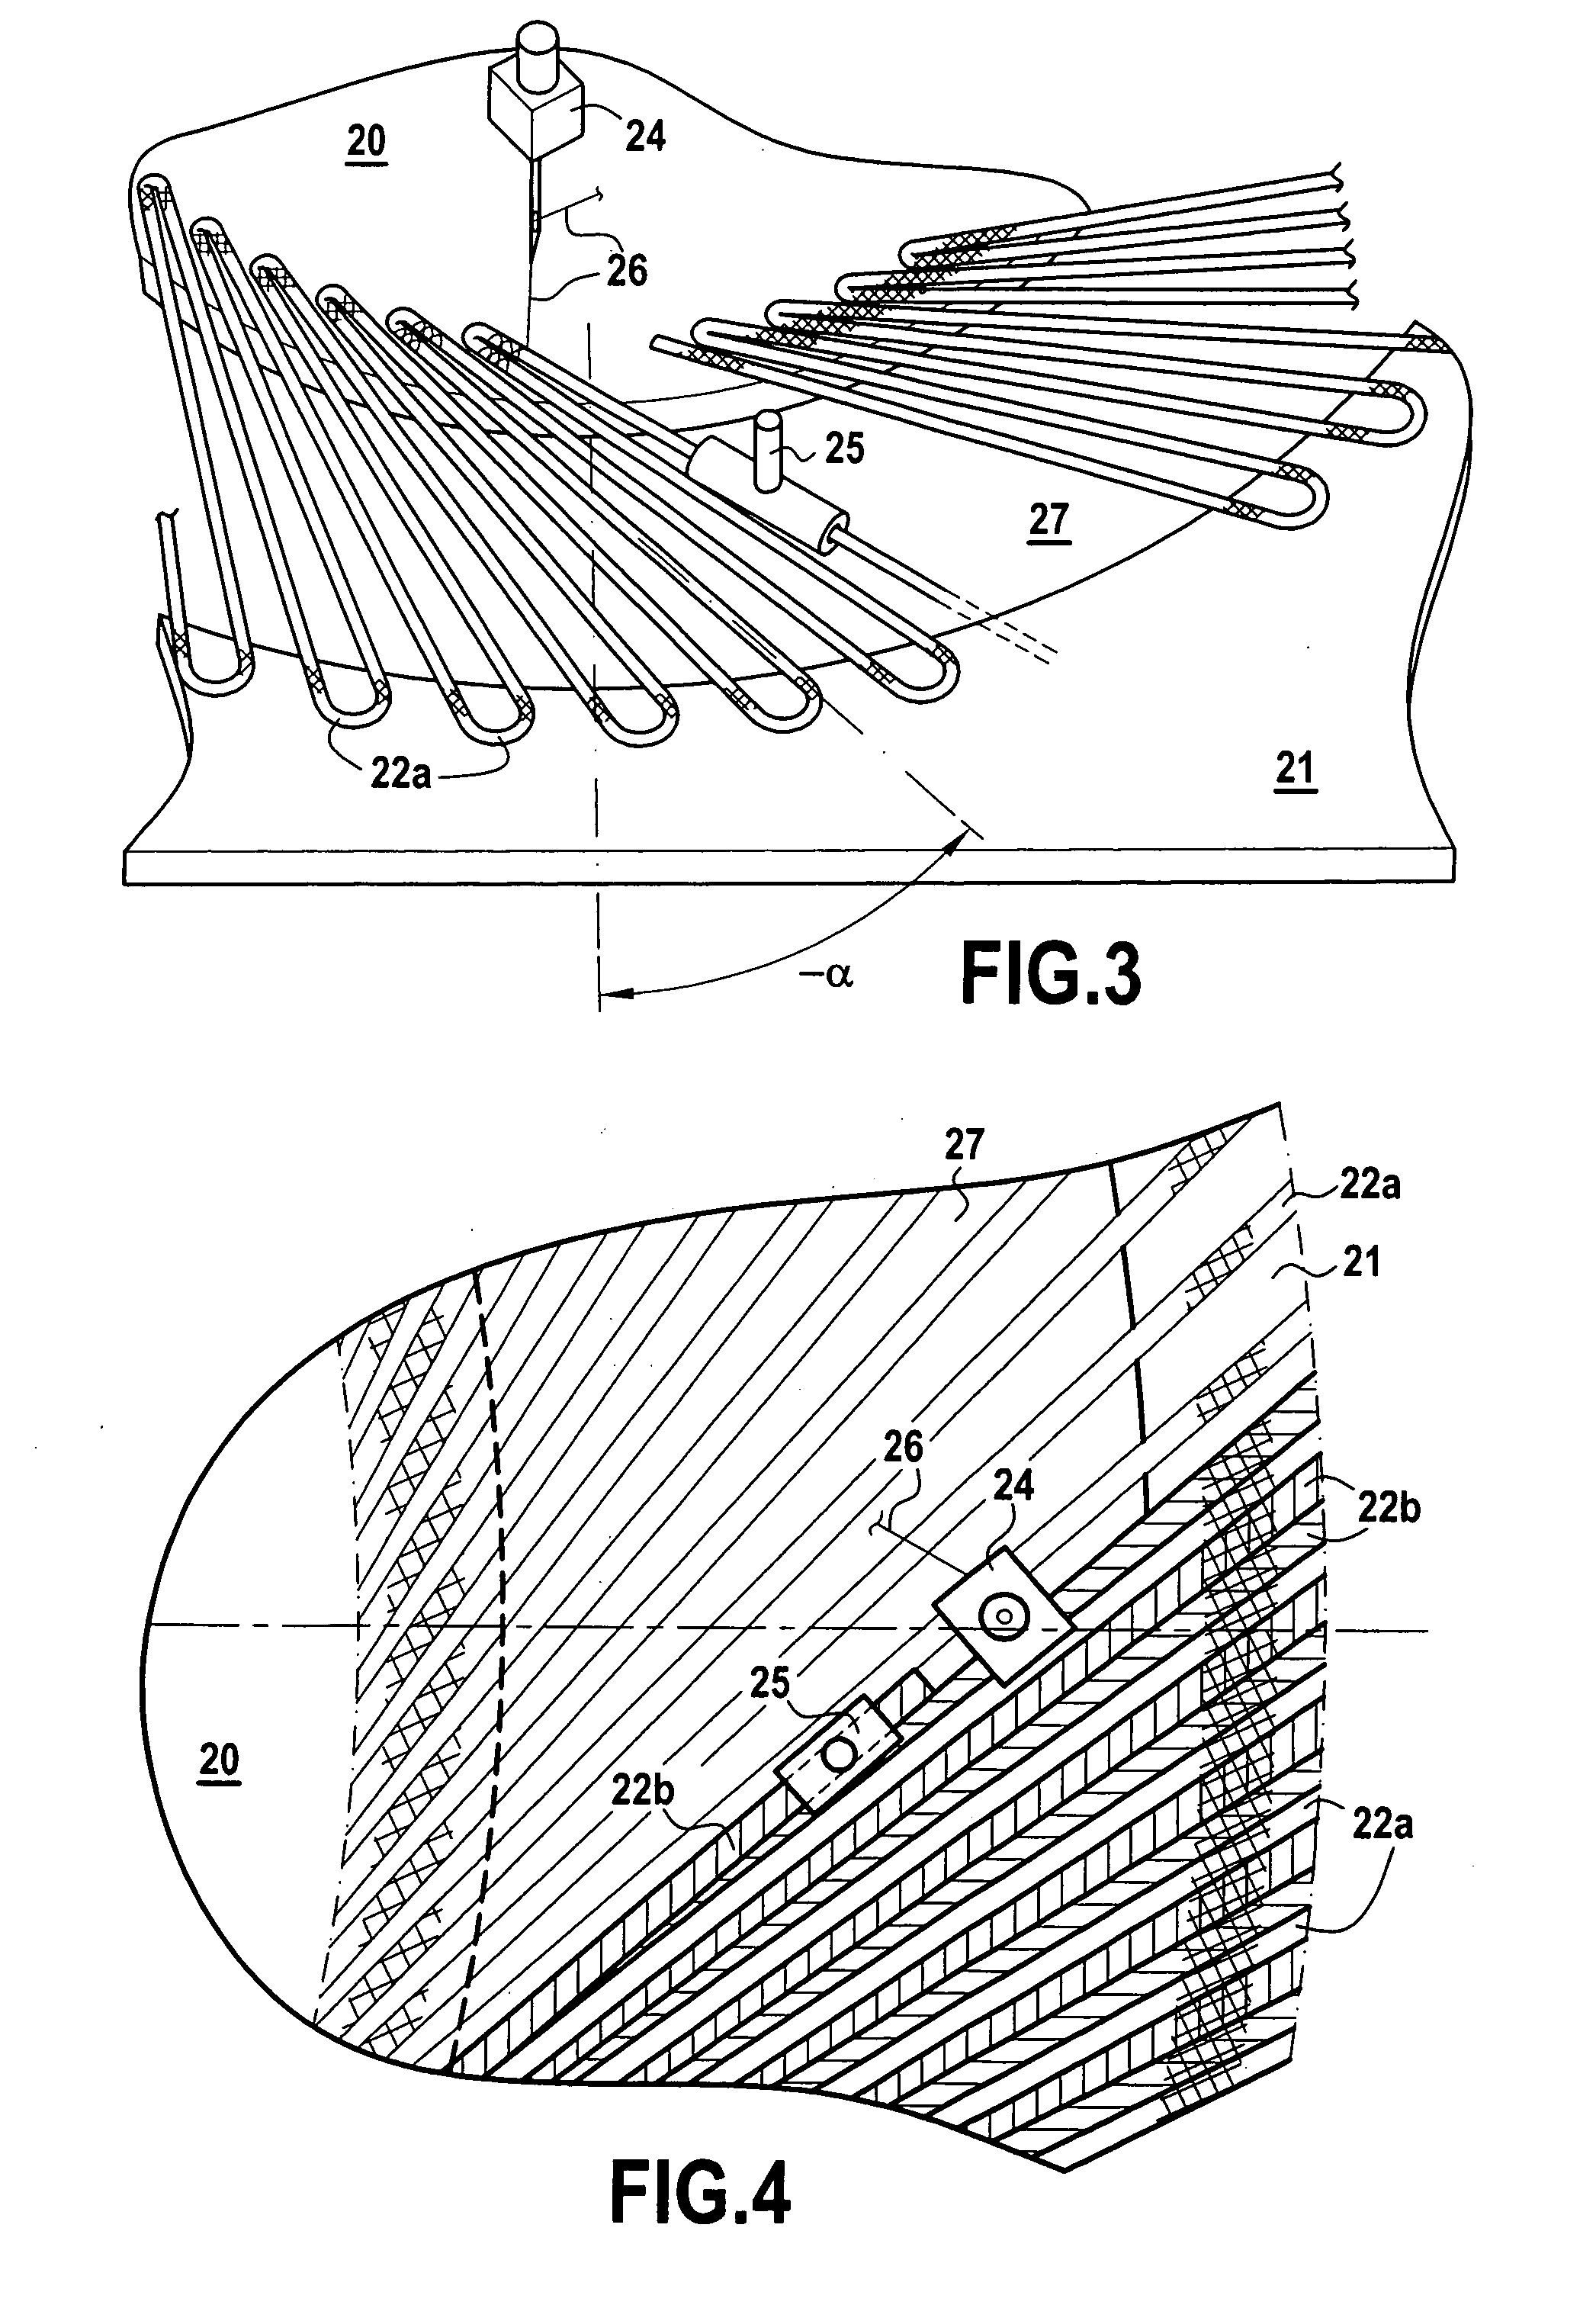 Method of making a unit comprising a casing and diverging portion